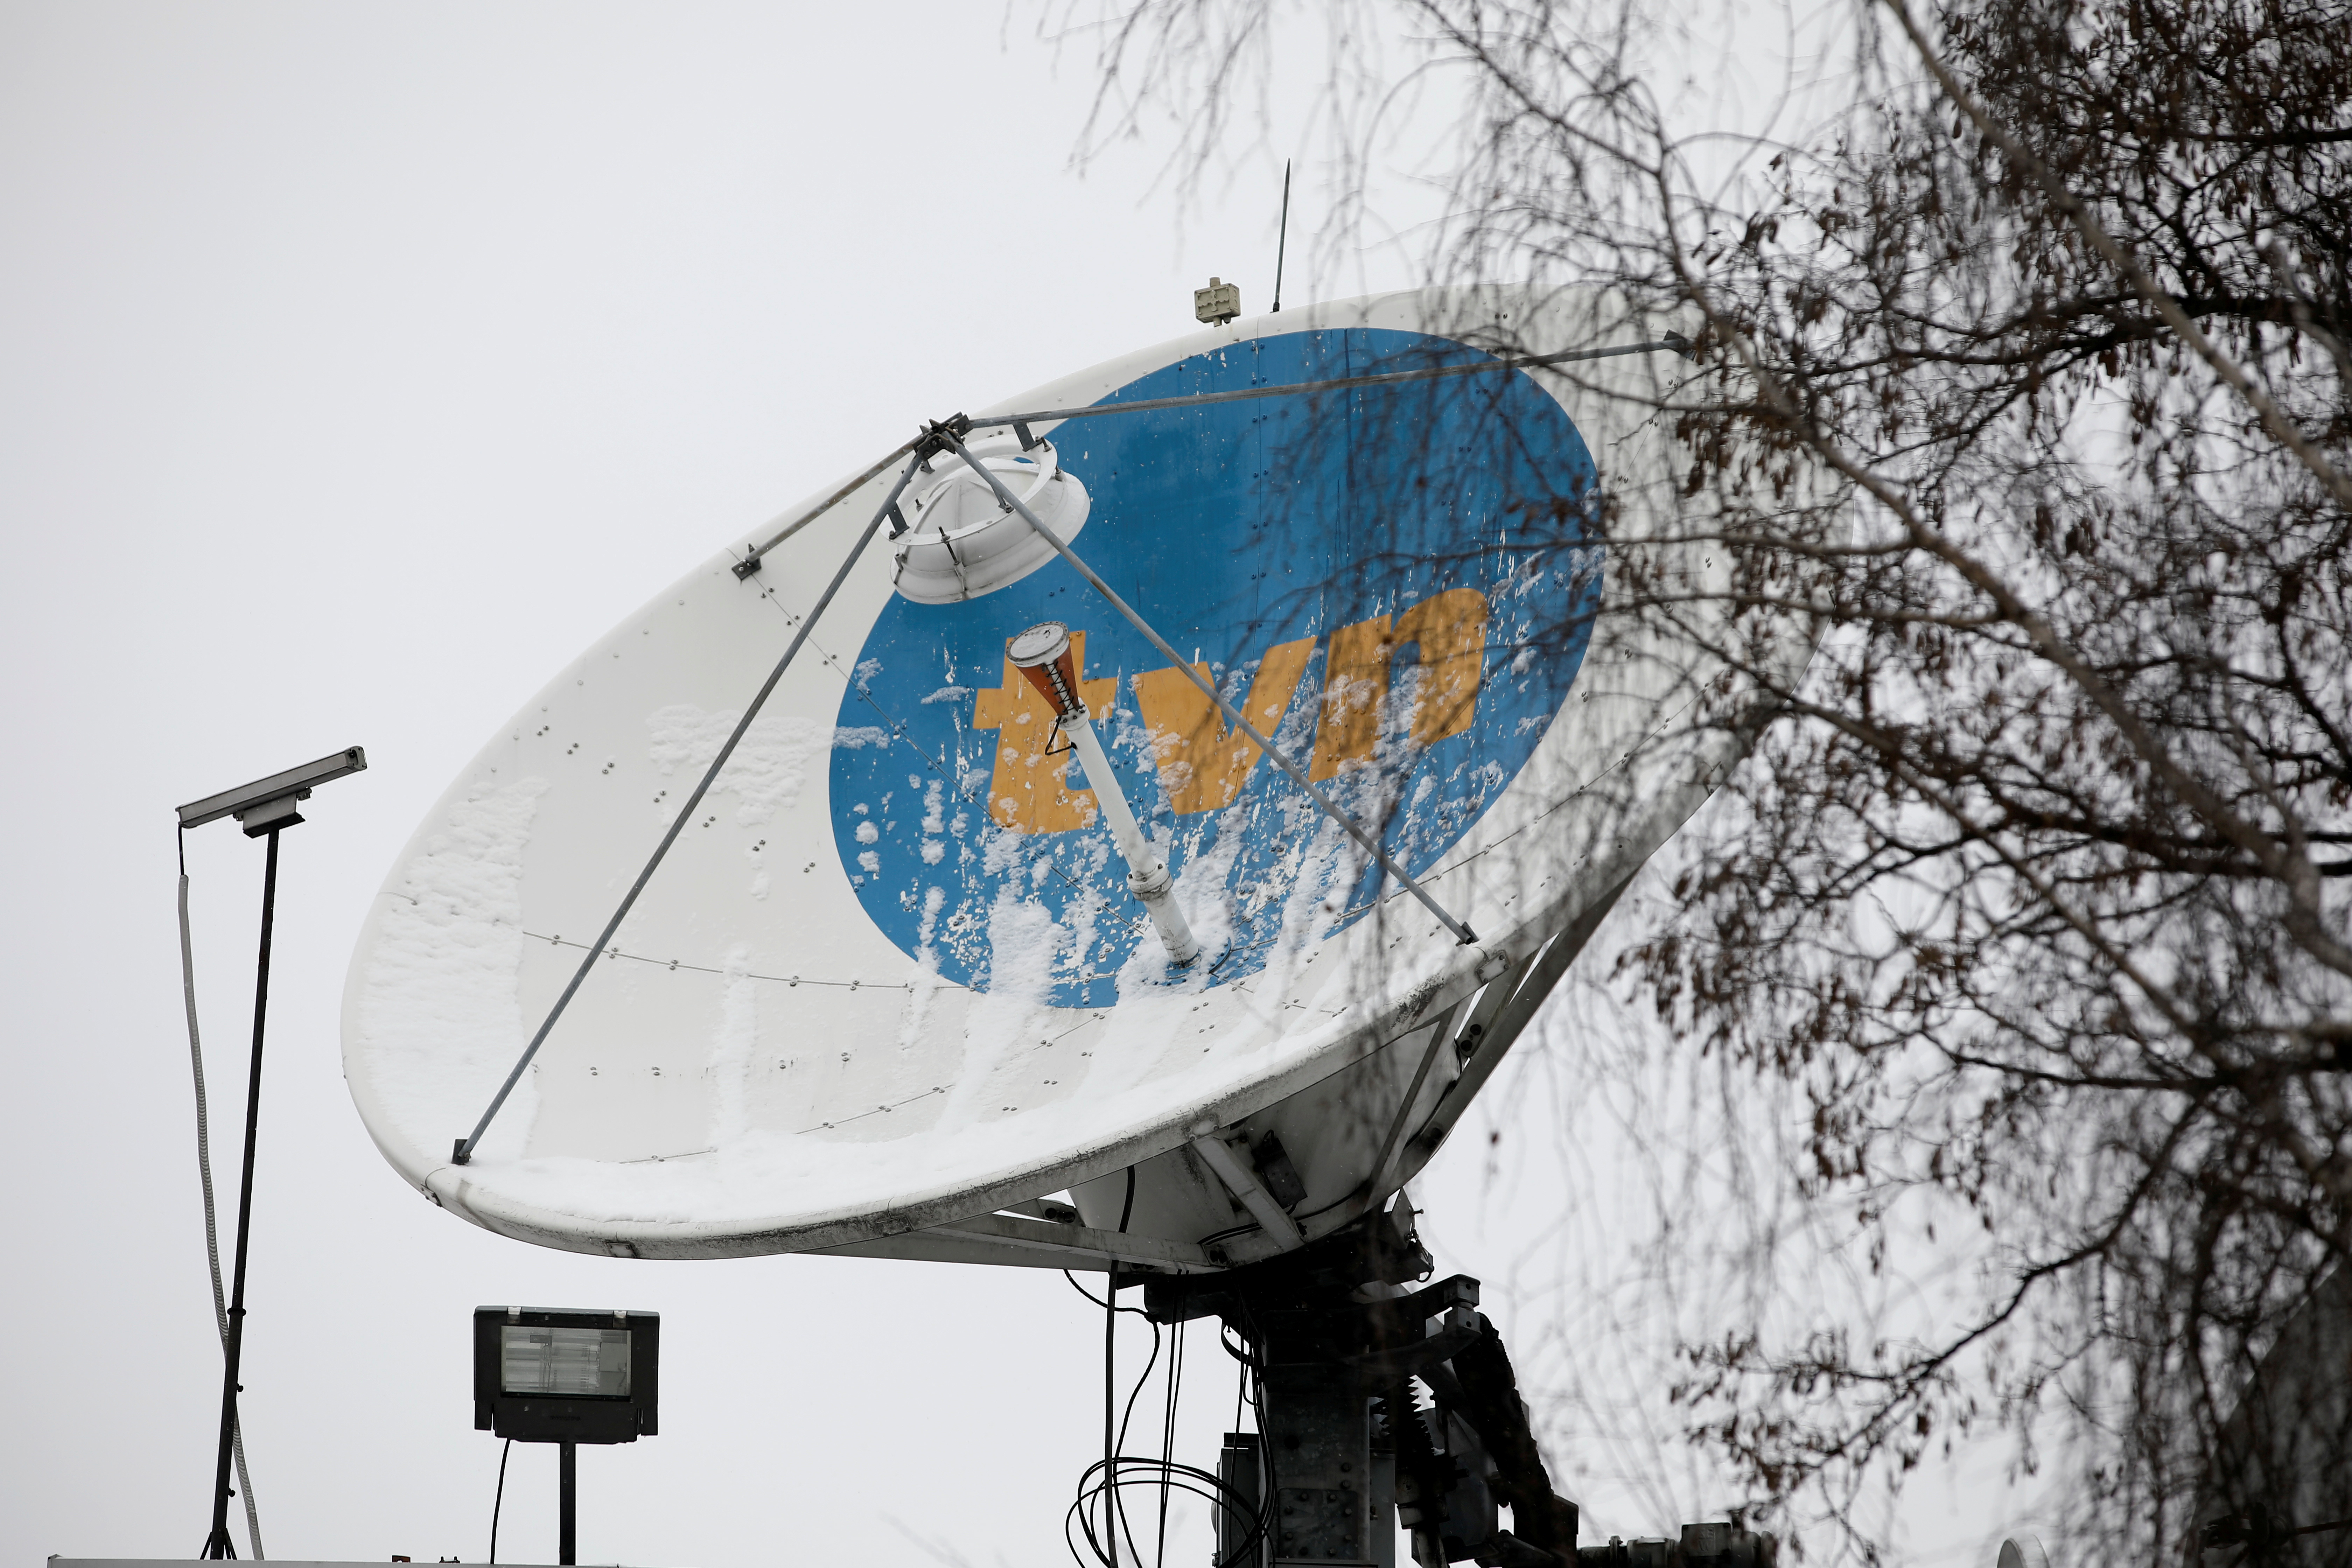 Private television TVN logo is see on satellite antenna at their headquarters in Warsaw